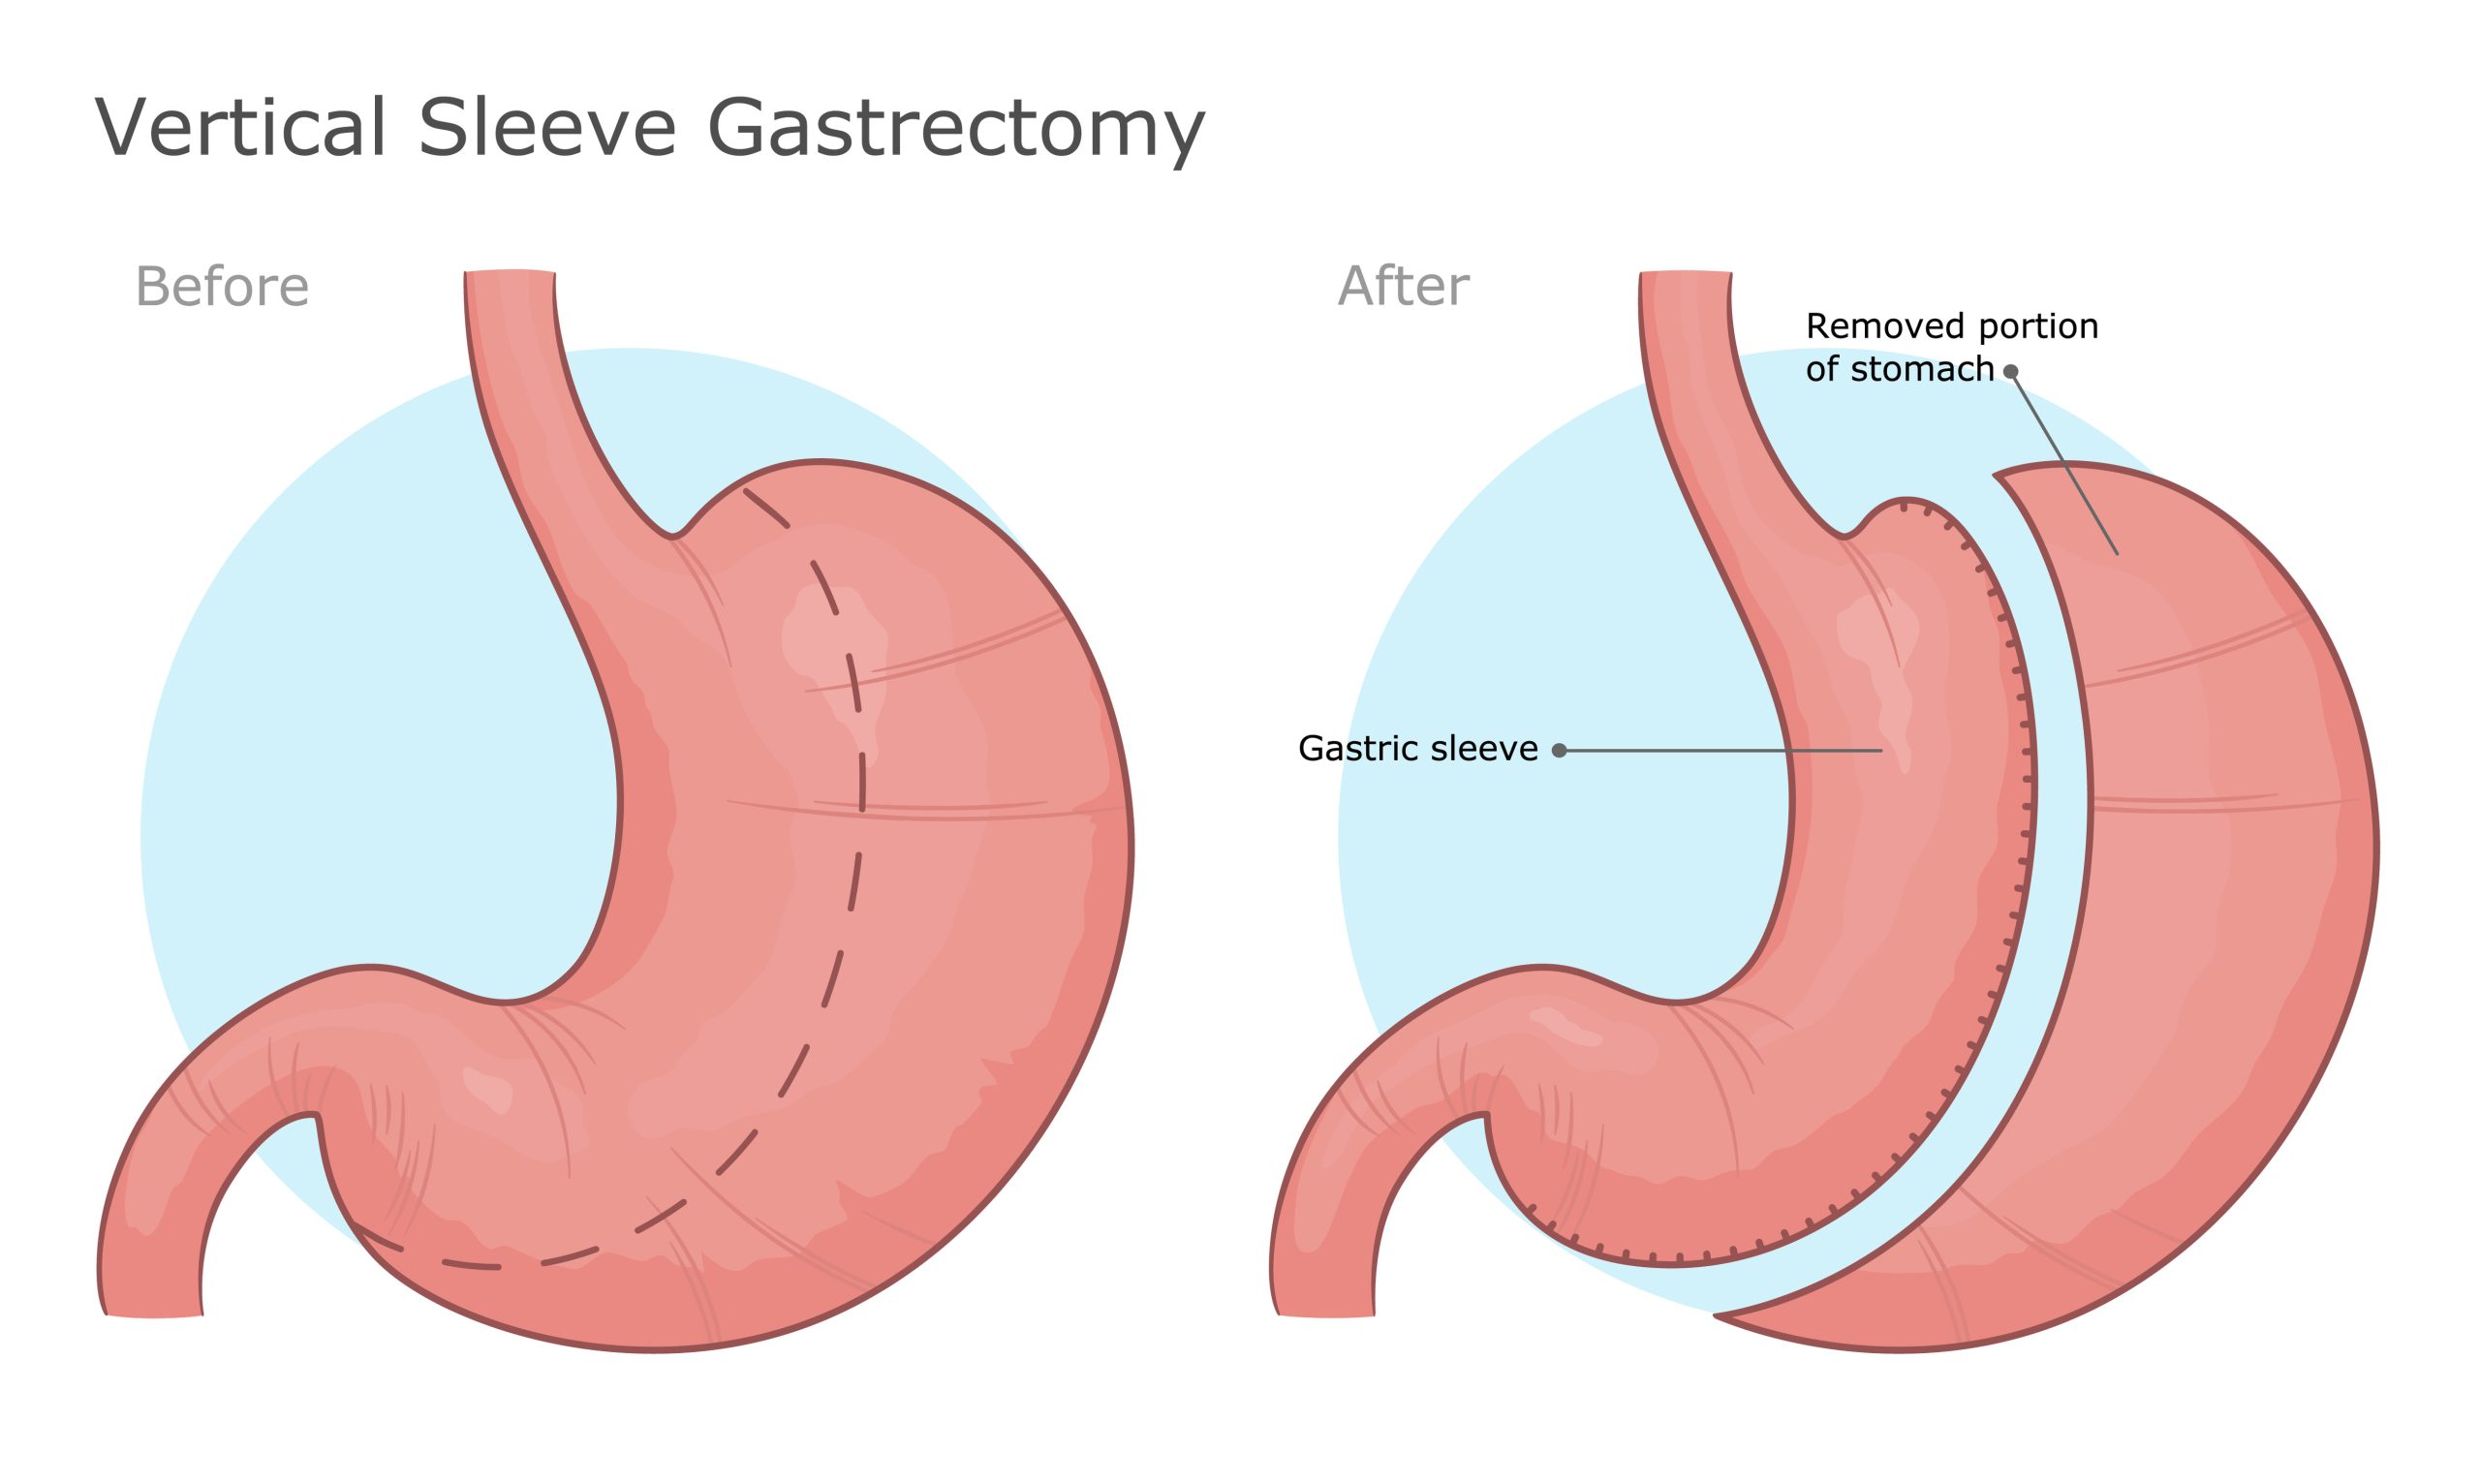 Evaluating Success and Long-Term Complications in Sleeve Gastrectomy